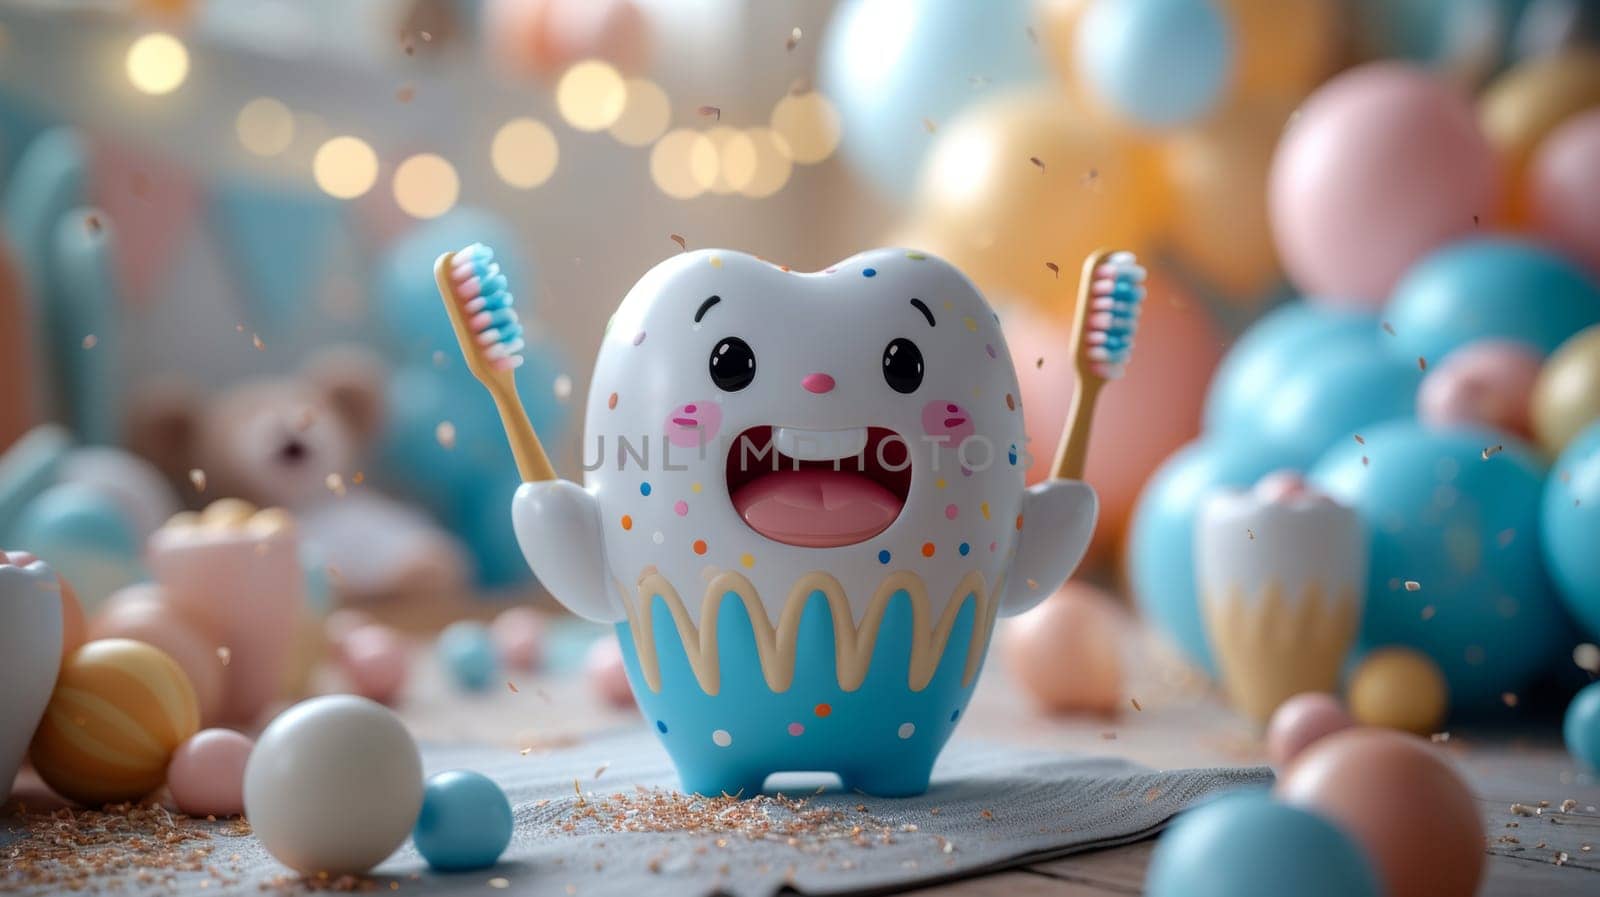 A happy smiling tooth on a festive background with colorful balls is the concept of a clean tooth. 3d illustration by Lobachad